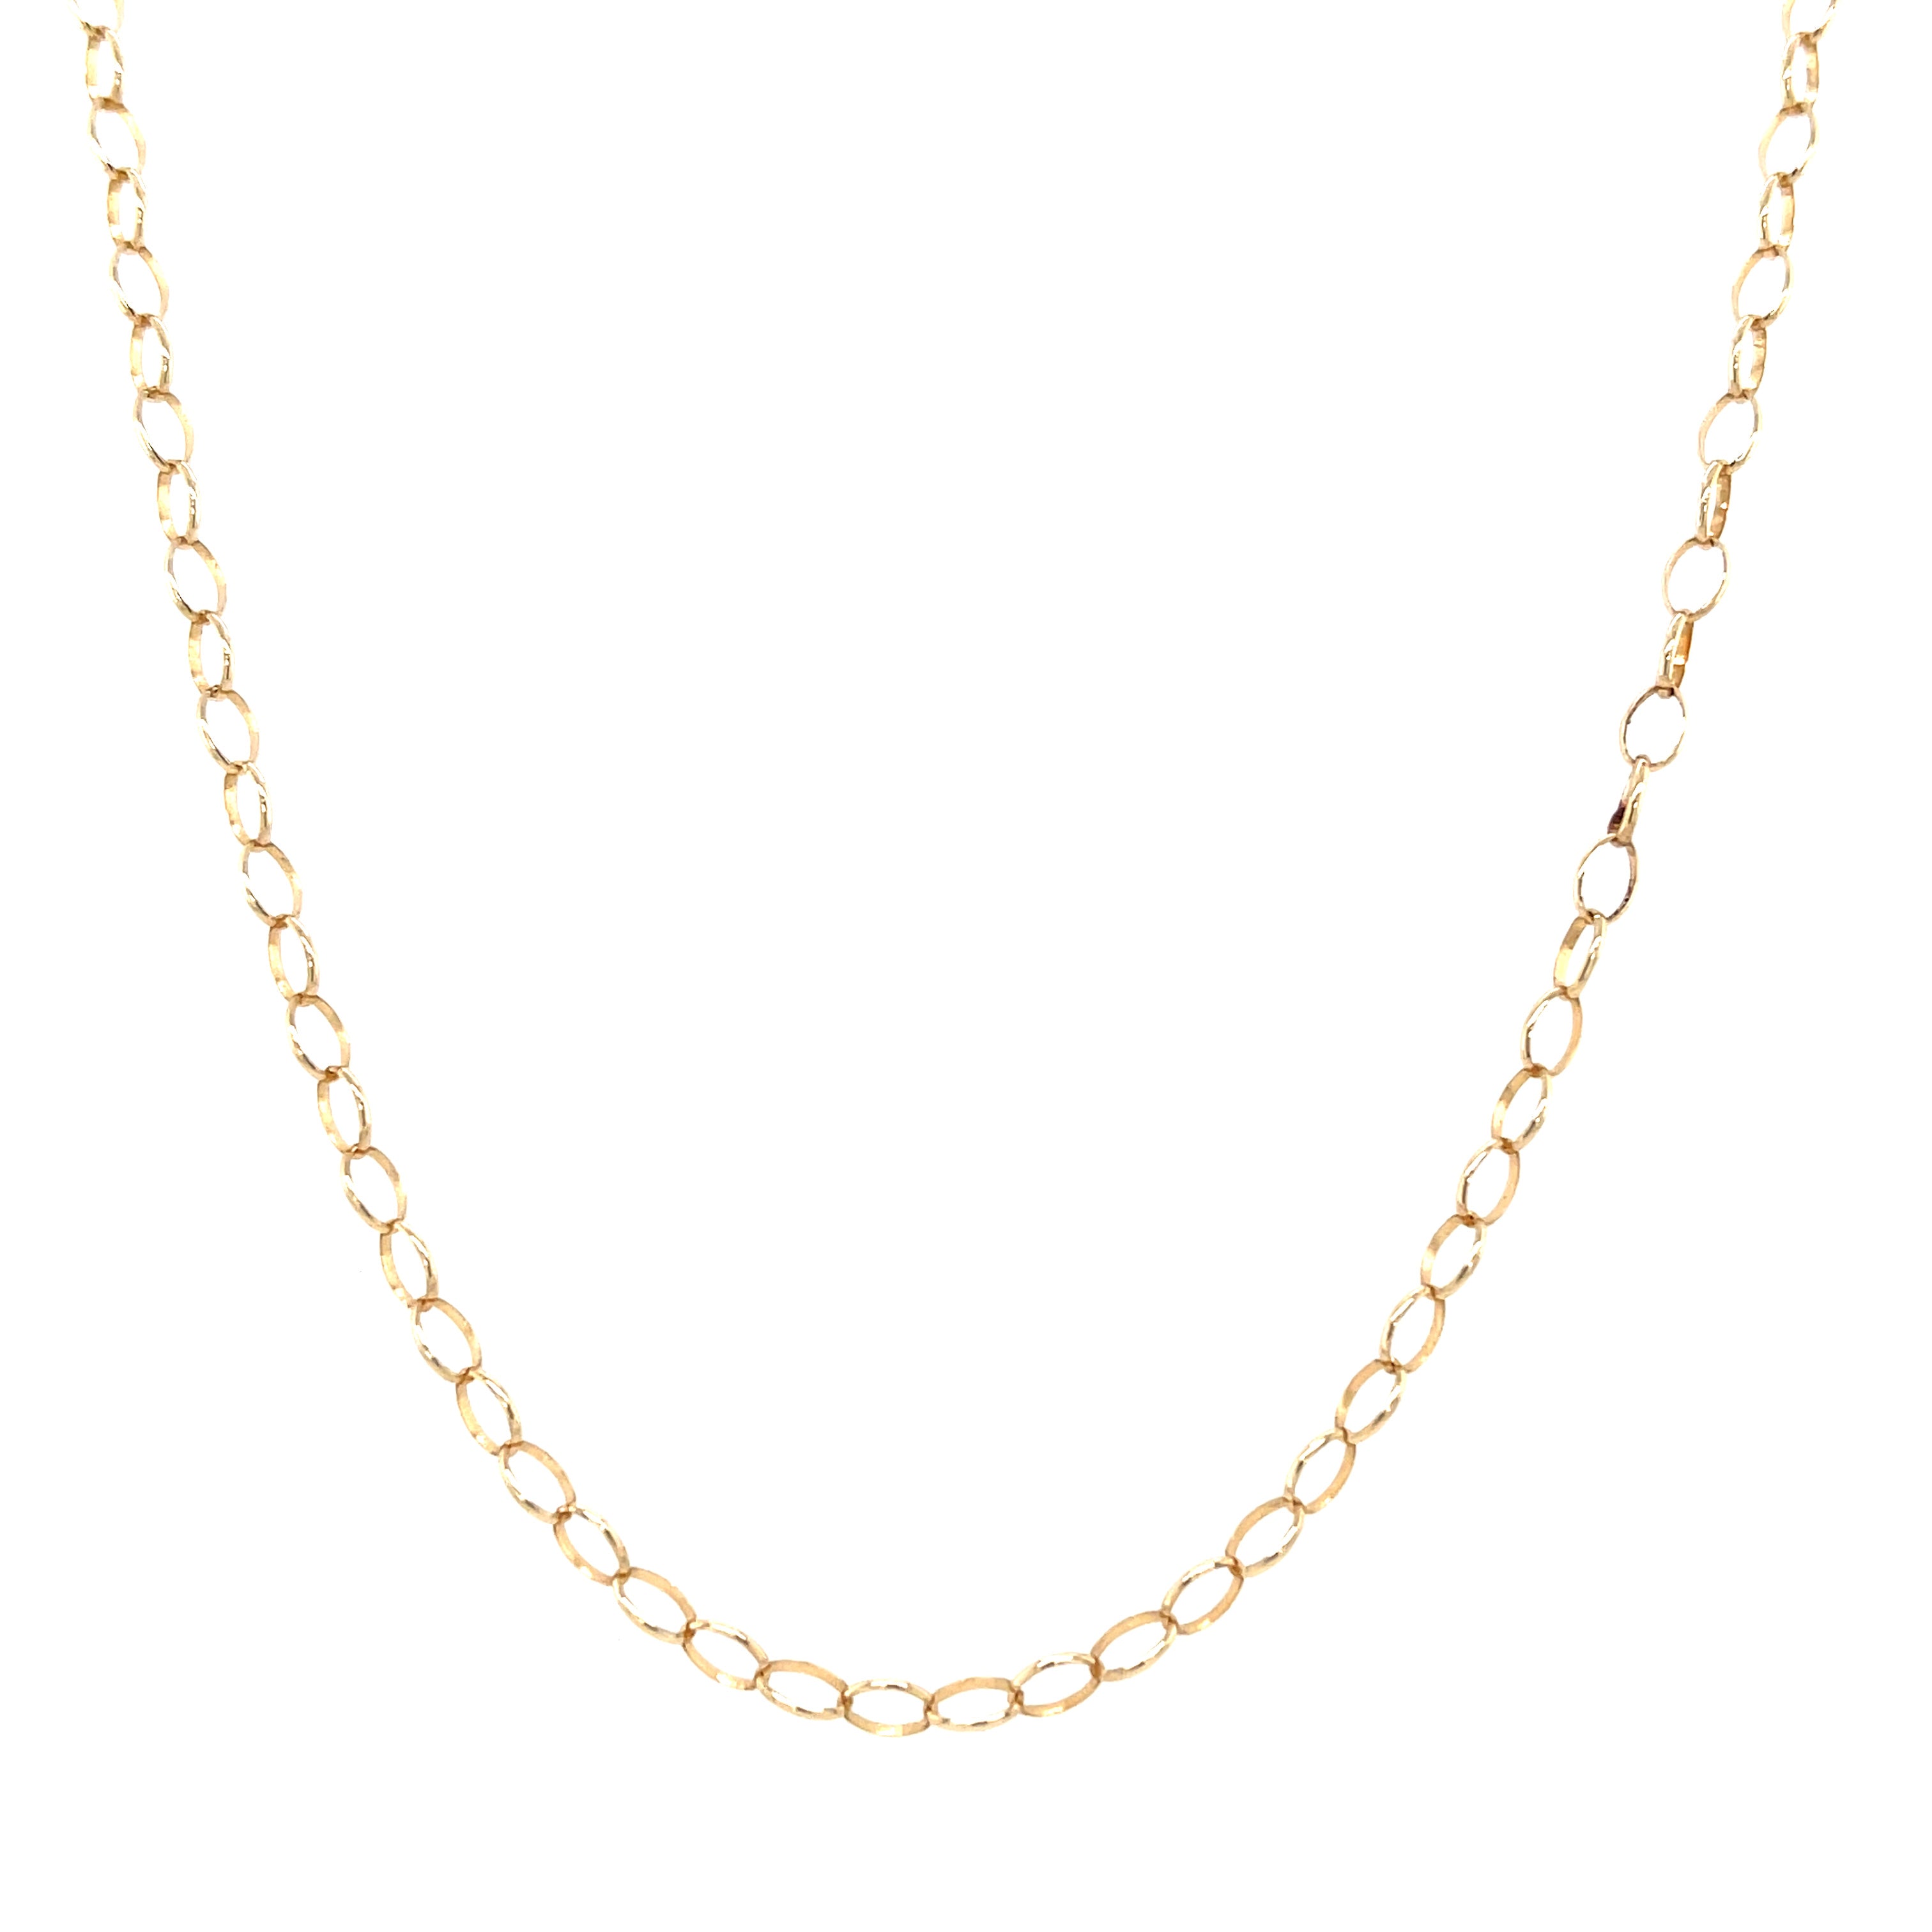 9ct Yellow Gold 18" Oval Belcher Link Chain - 2.20g SOLD